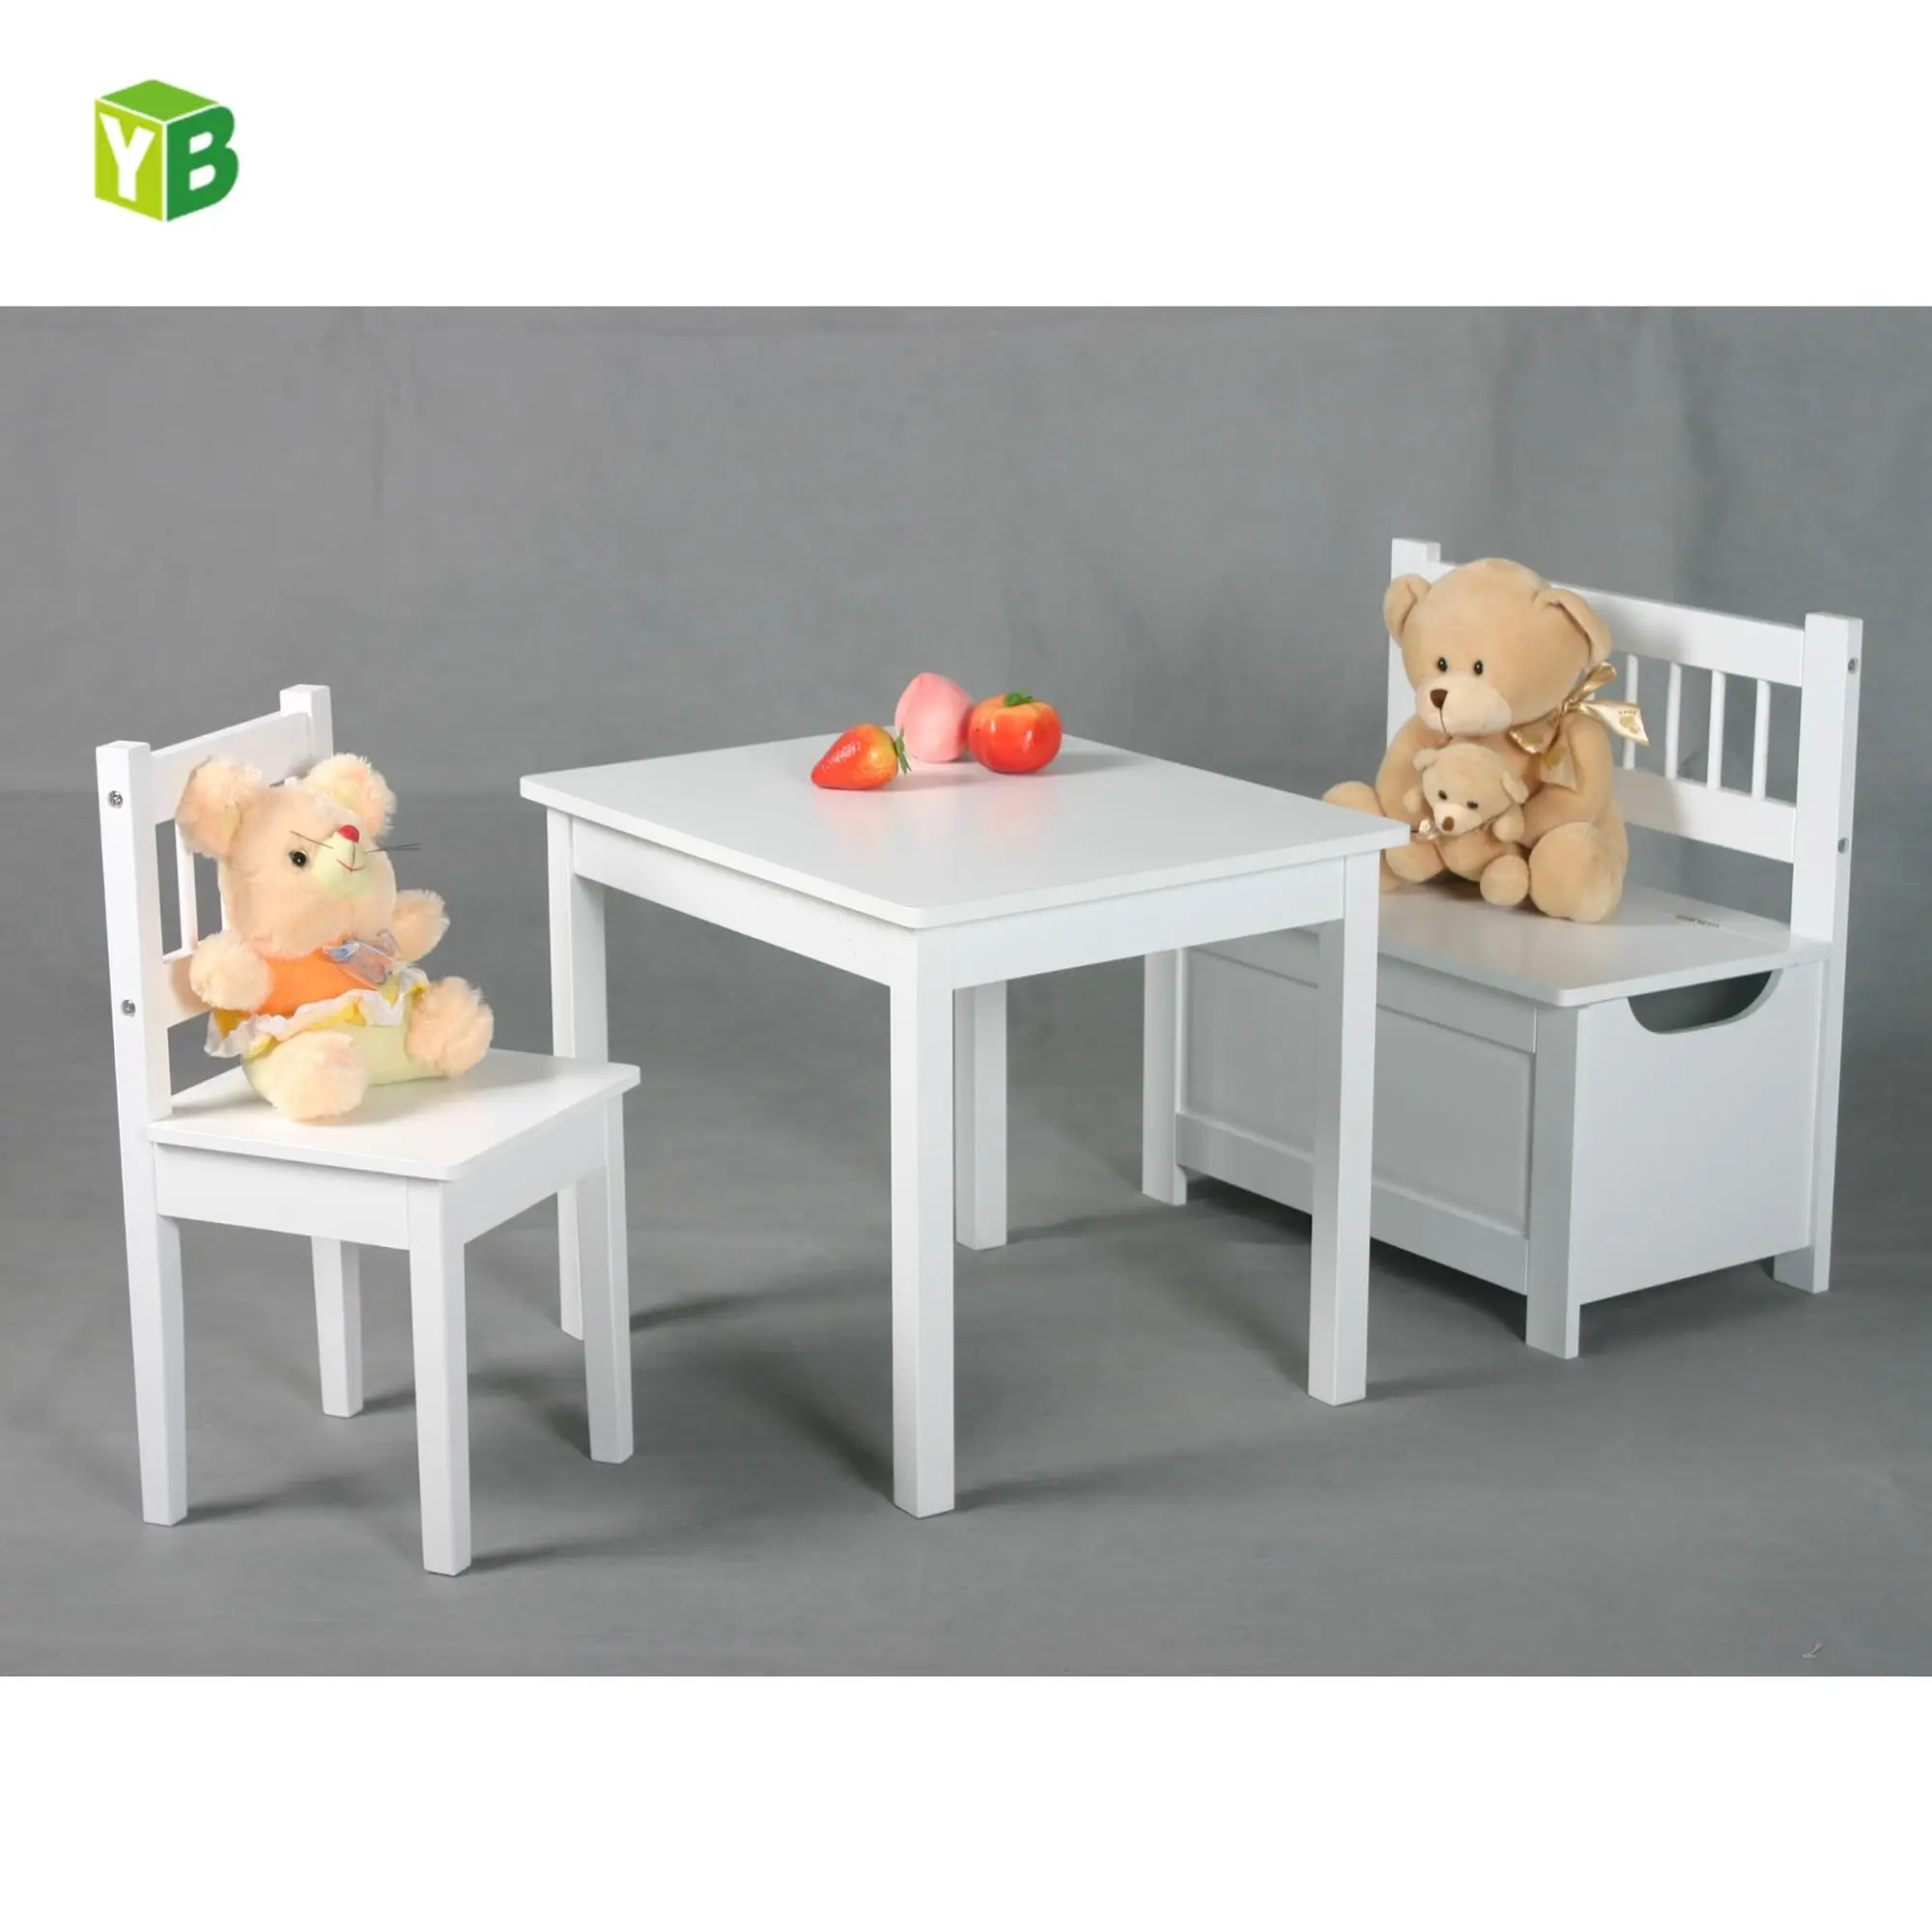 wooden kids study table